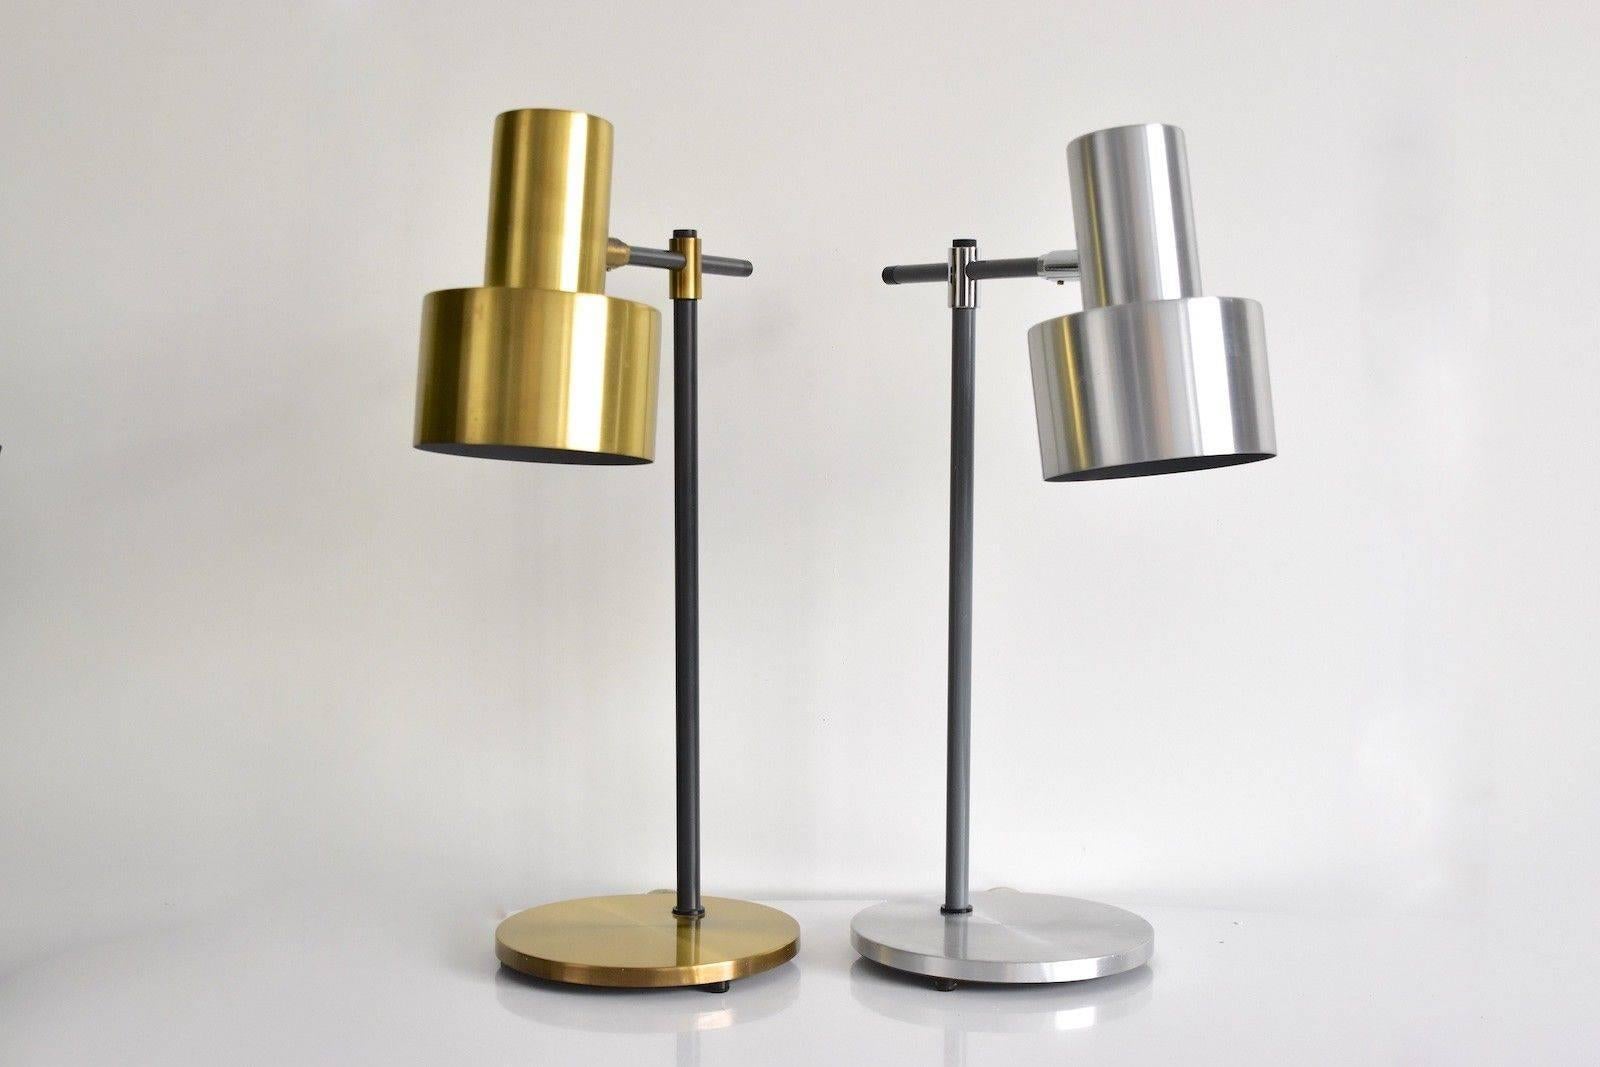 Jo Hammerborg Lento table lamp for Fog & Mørup, 1960s. 
Brass colored metal. Very good condition.